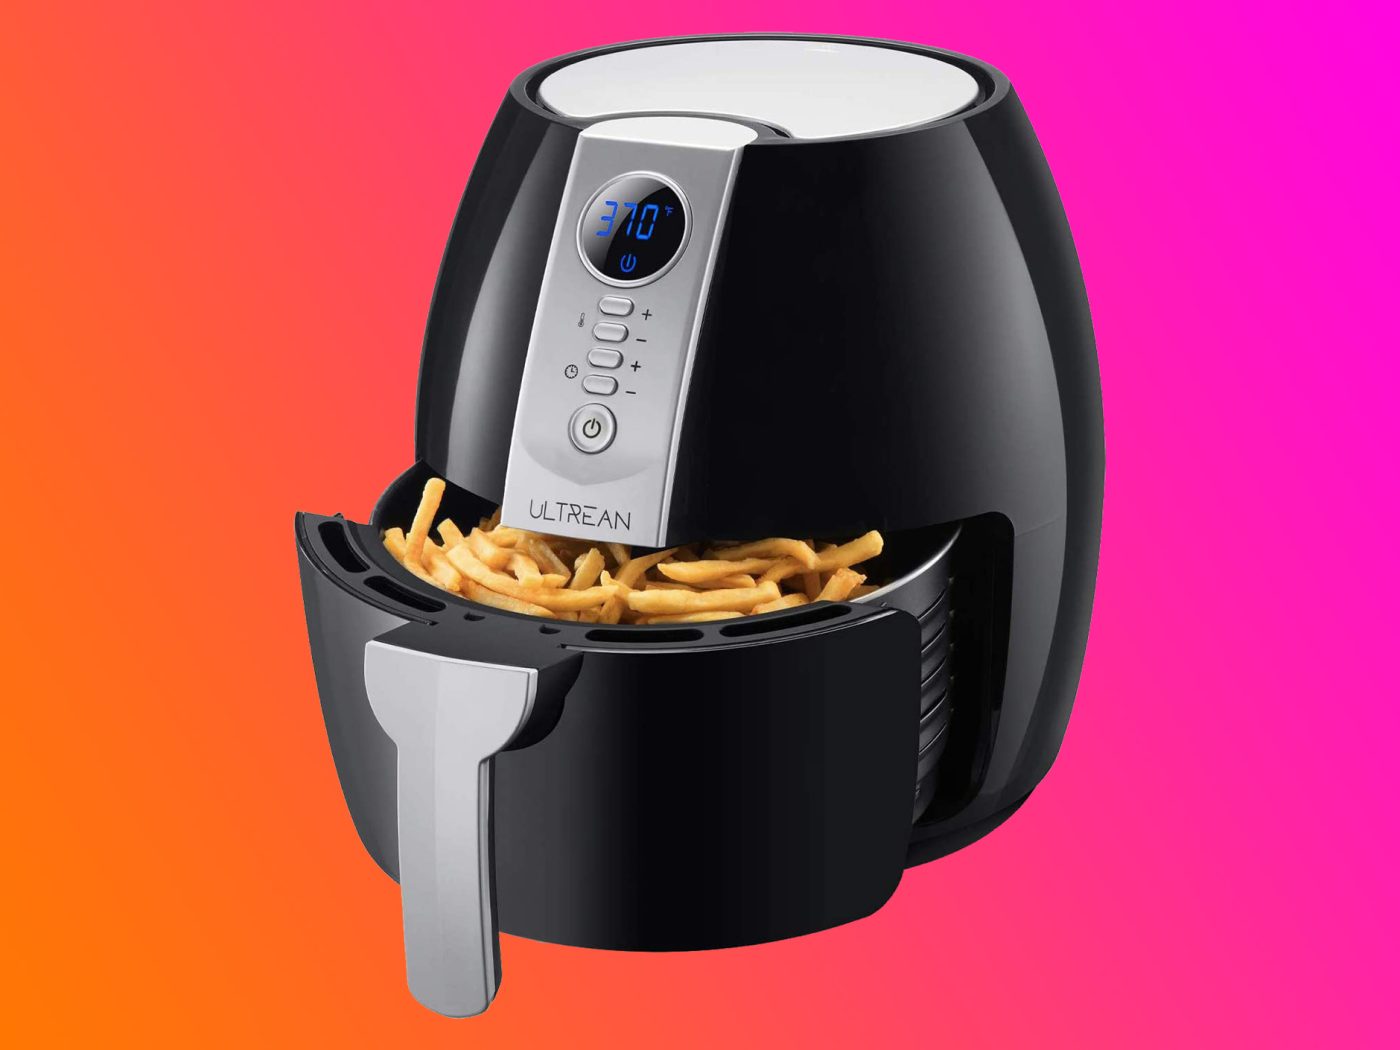 Cyber Monday 2019: The best air fryer deals you can get right now